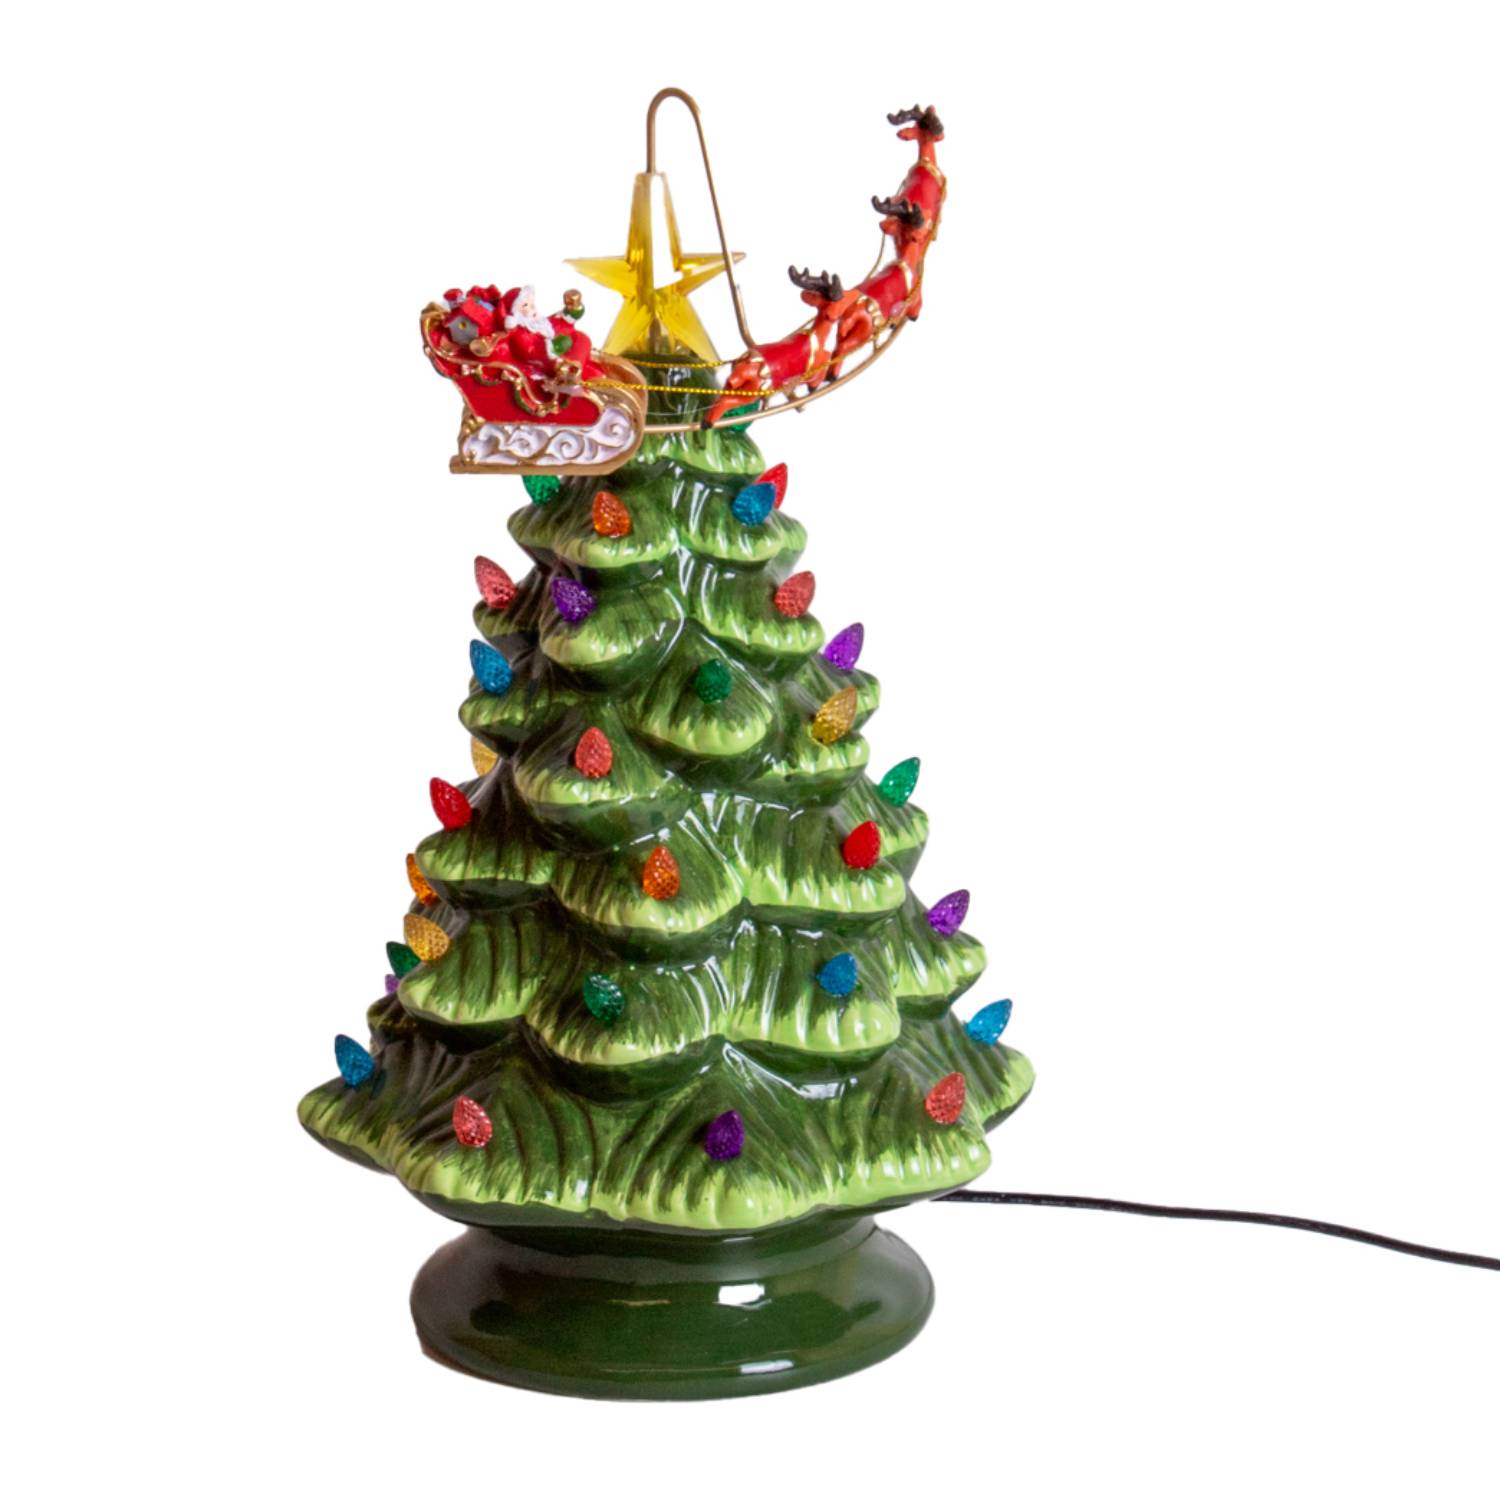 Gerson 12 Lighted Ceramic Holiday Christmas Tree with Rotating Sleigh & Adapter